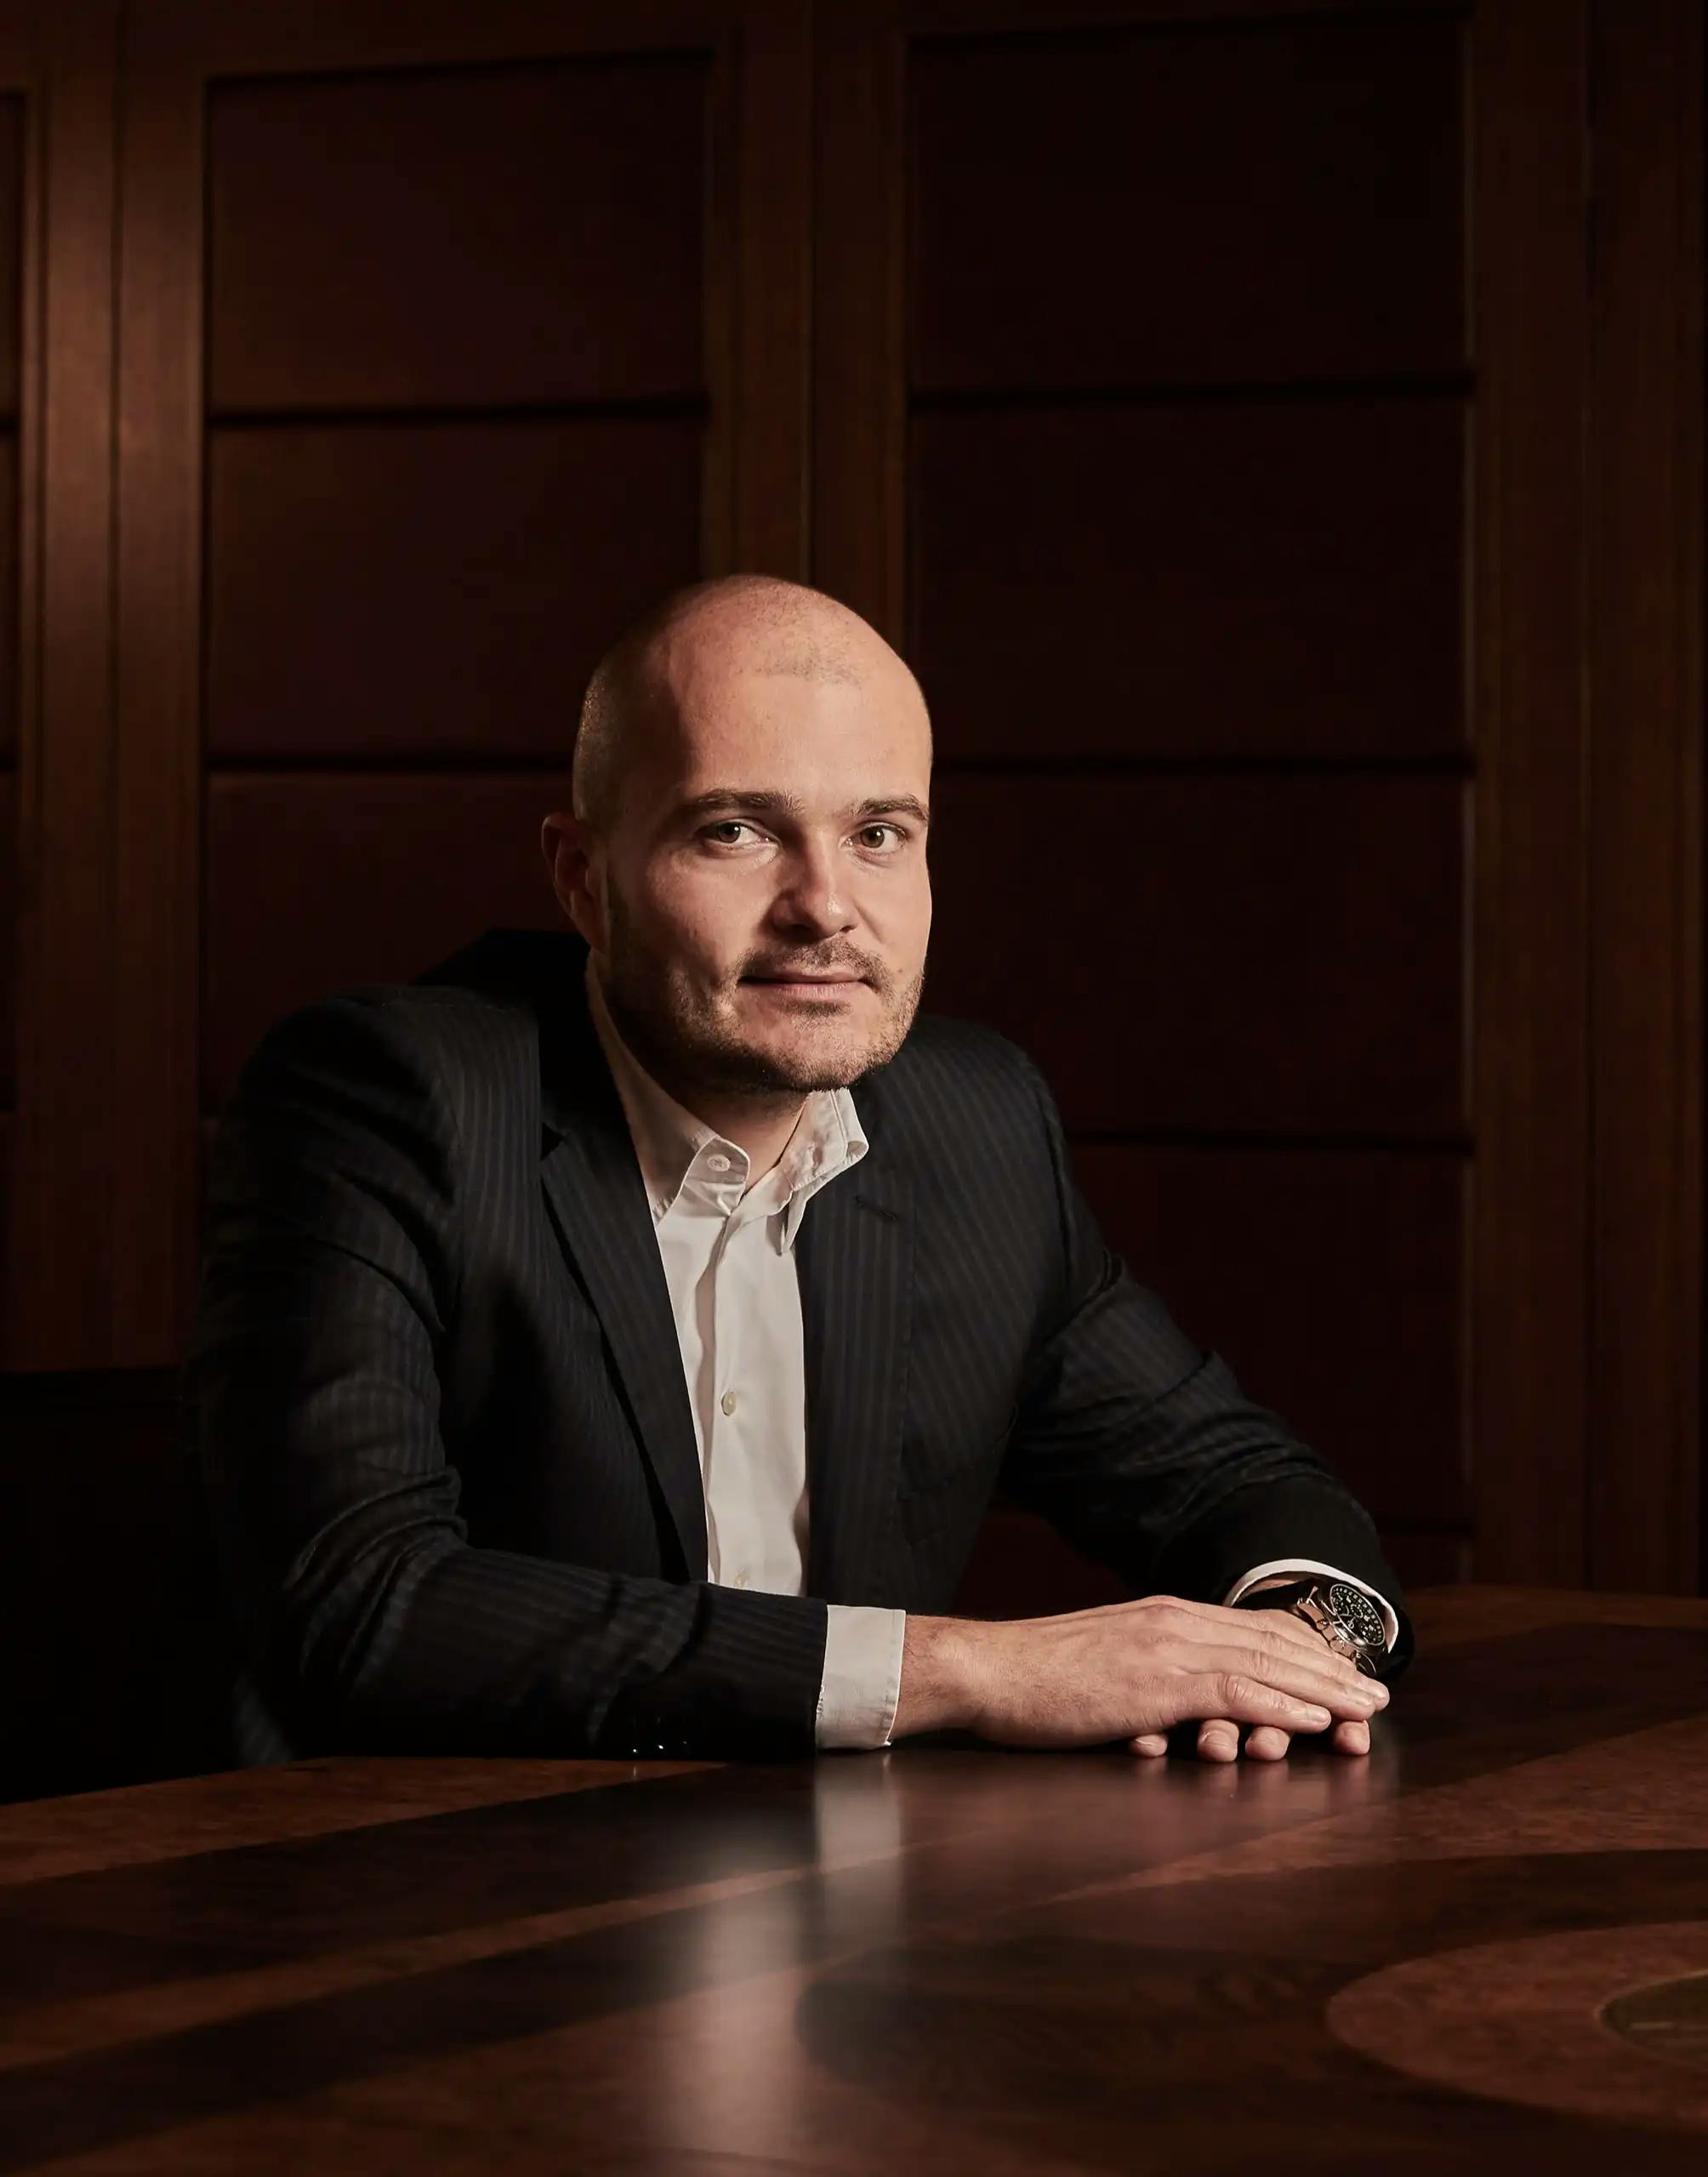 Michal Strnad, owner of CSG Group